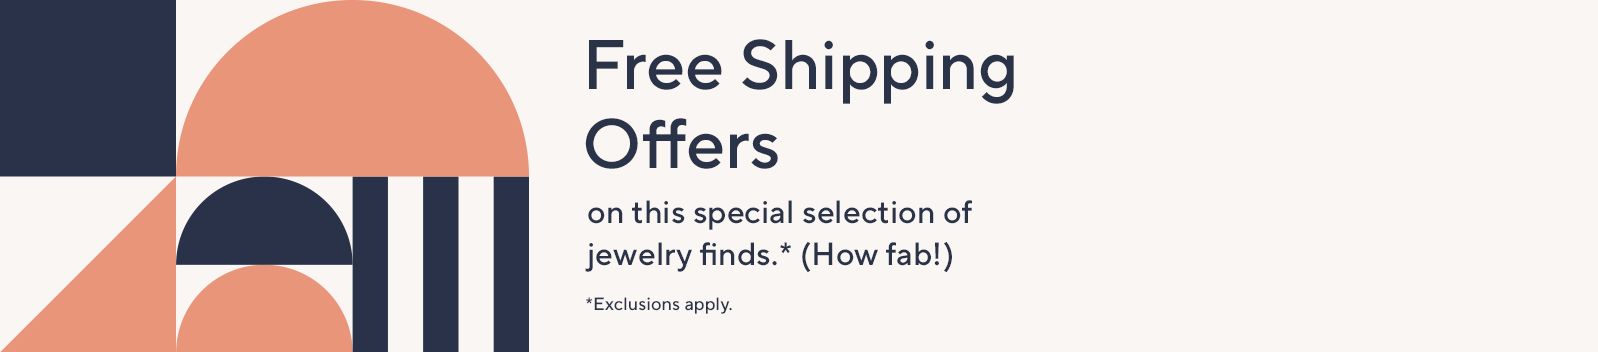 Free Shipping Offers on this special selection of jewelry finds.* (How fab!) *Exclusions apply.